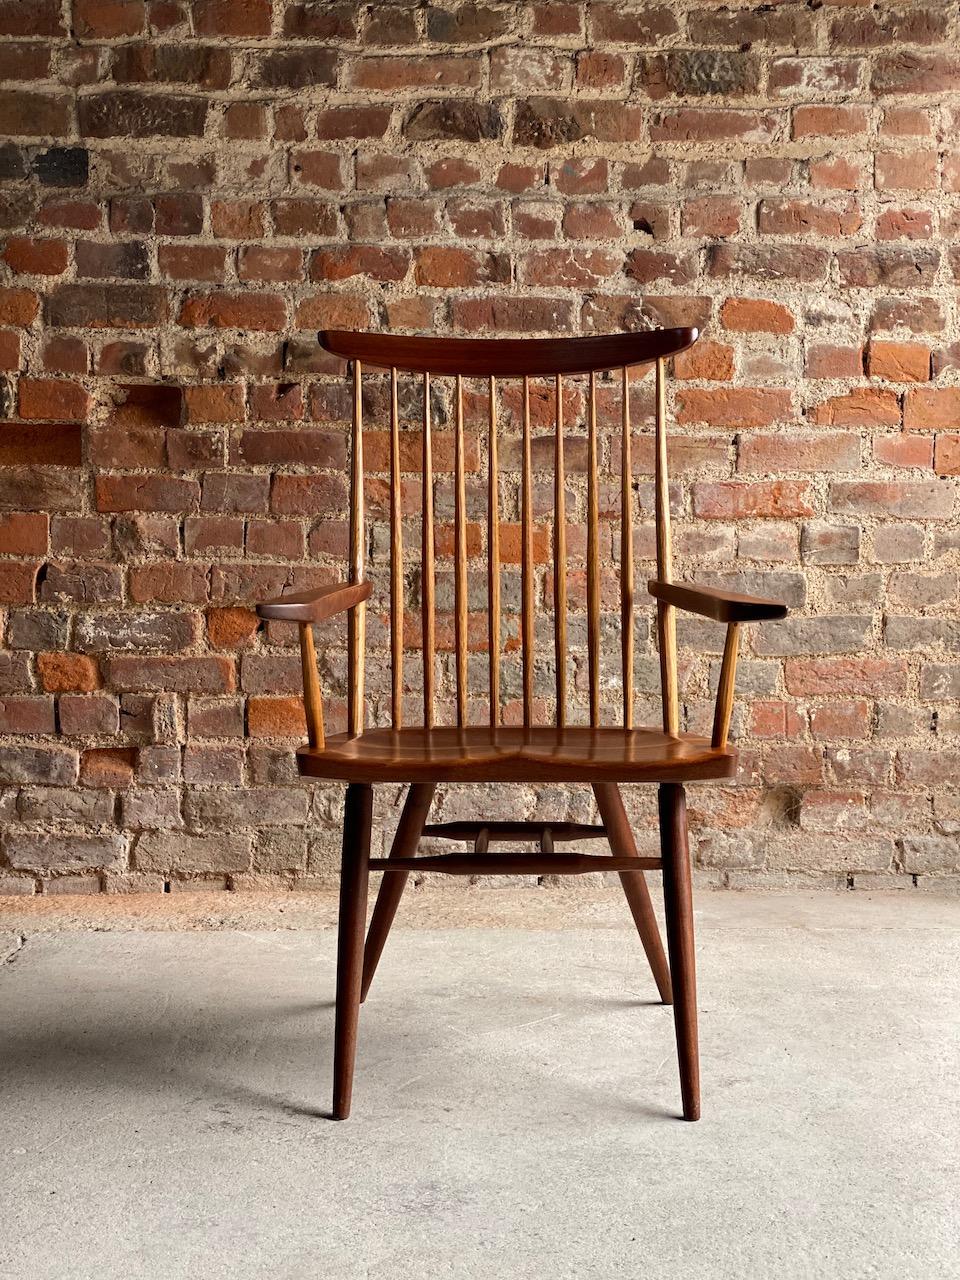 George Nakashima New Chair with arms walnut USA 1967

George Nakashima ’New Chair’ American black walnut and hickory spindle back chair with arms dated 1967, this chair was handcrafted by George Nakashima in his Woodworker complex, New Hope